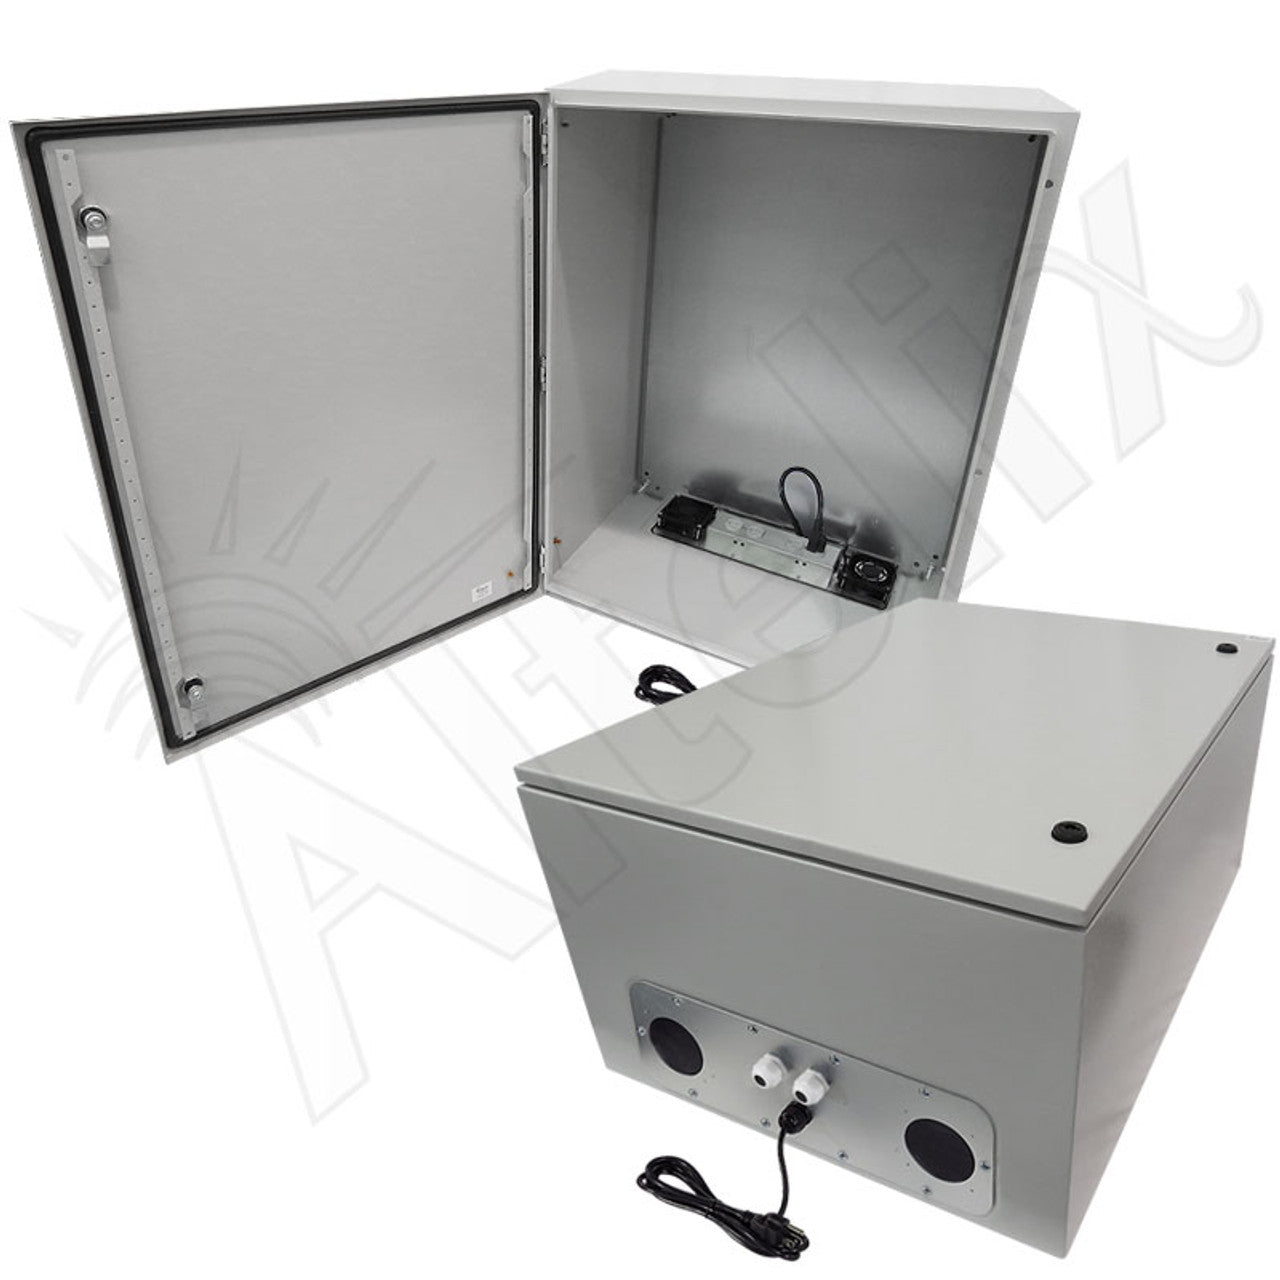 Altelix Steel Heated Weatherproof NEMA Enclosure with Dual Cooling Fans, 200W Heater, 120 VAC Outlets and Power Cord-10